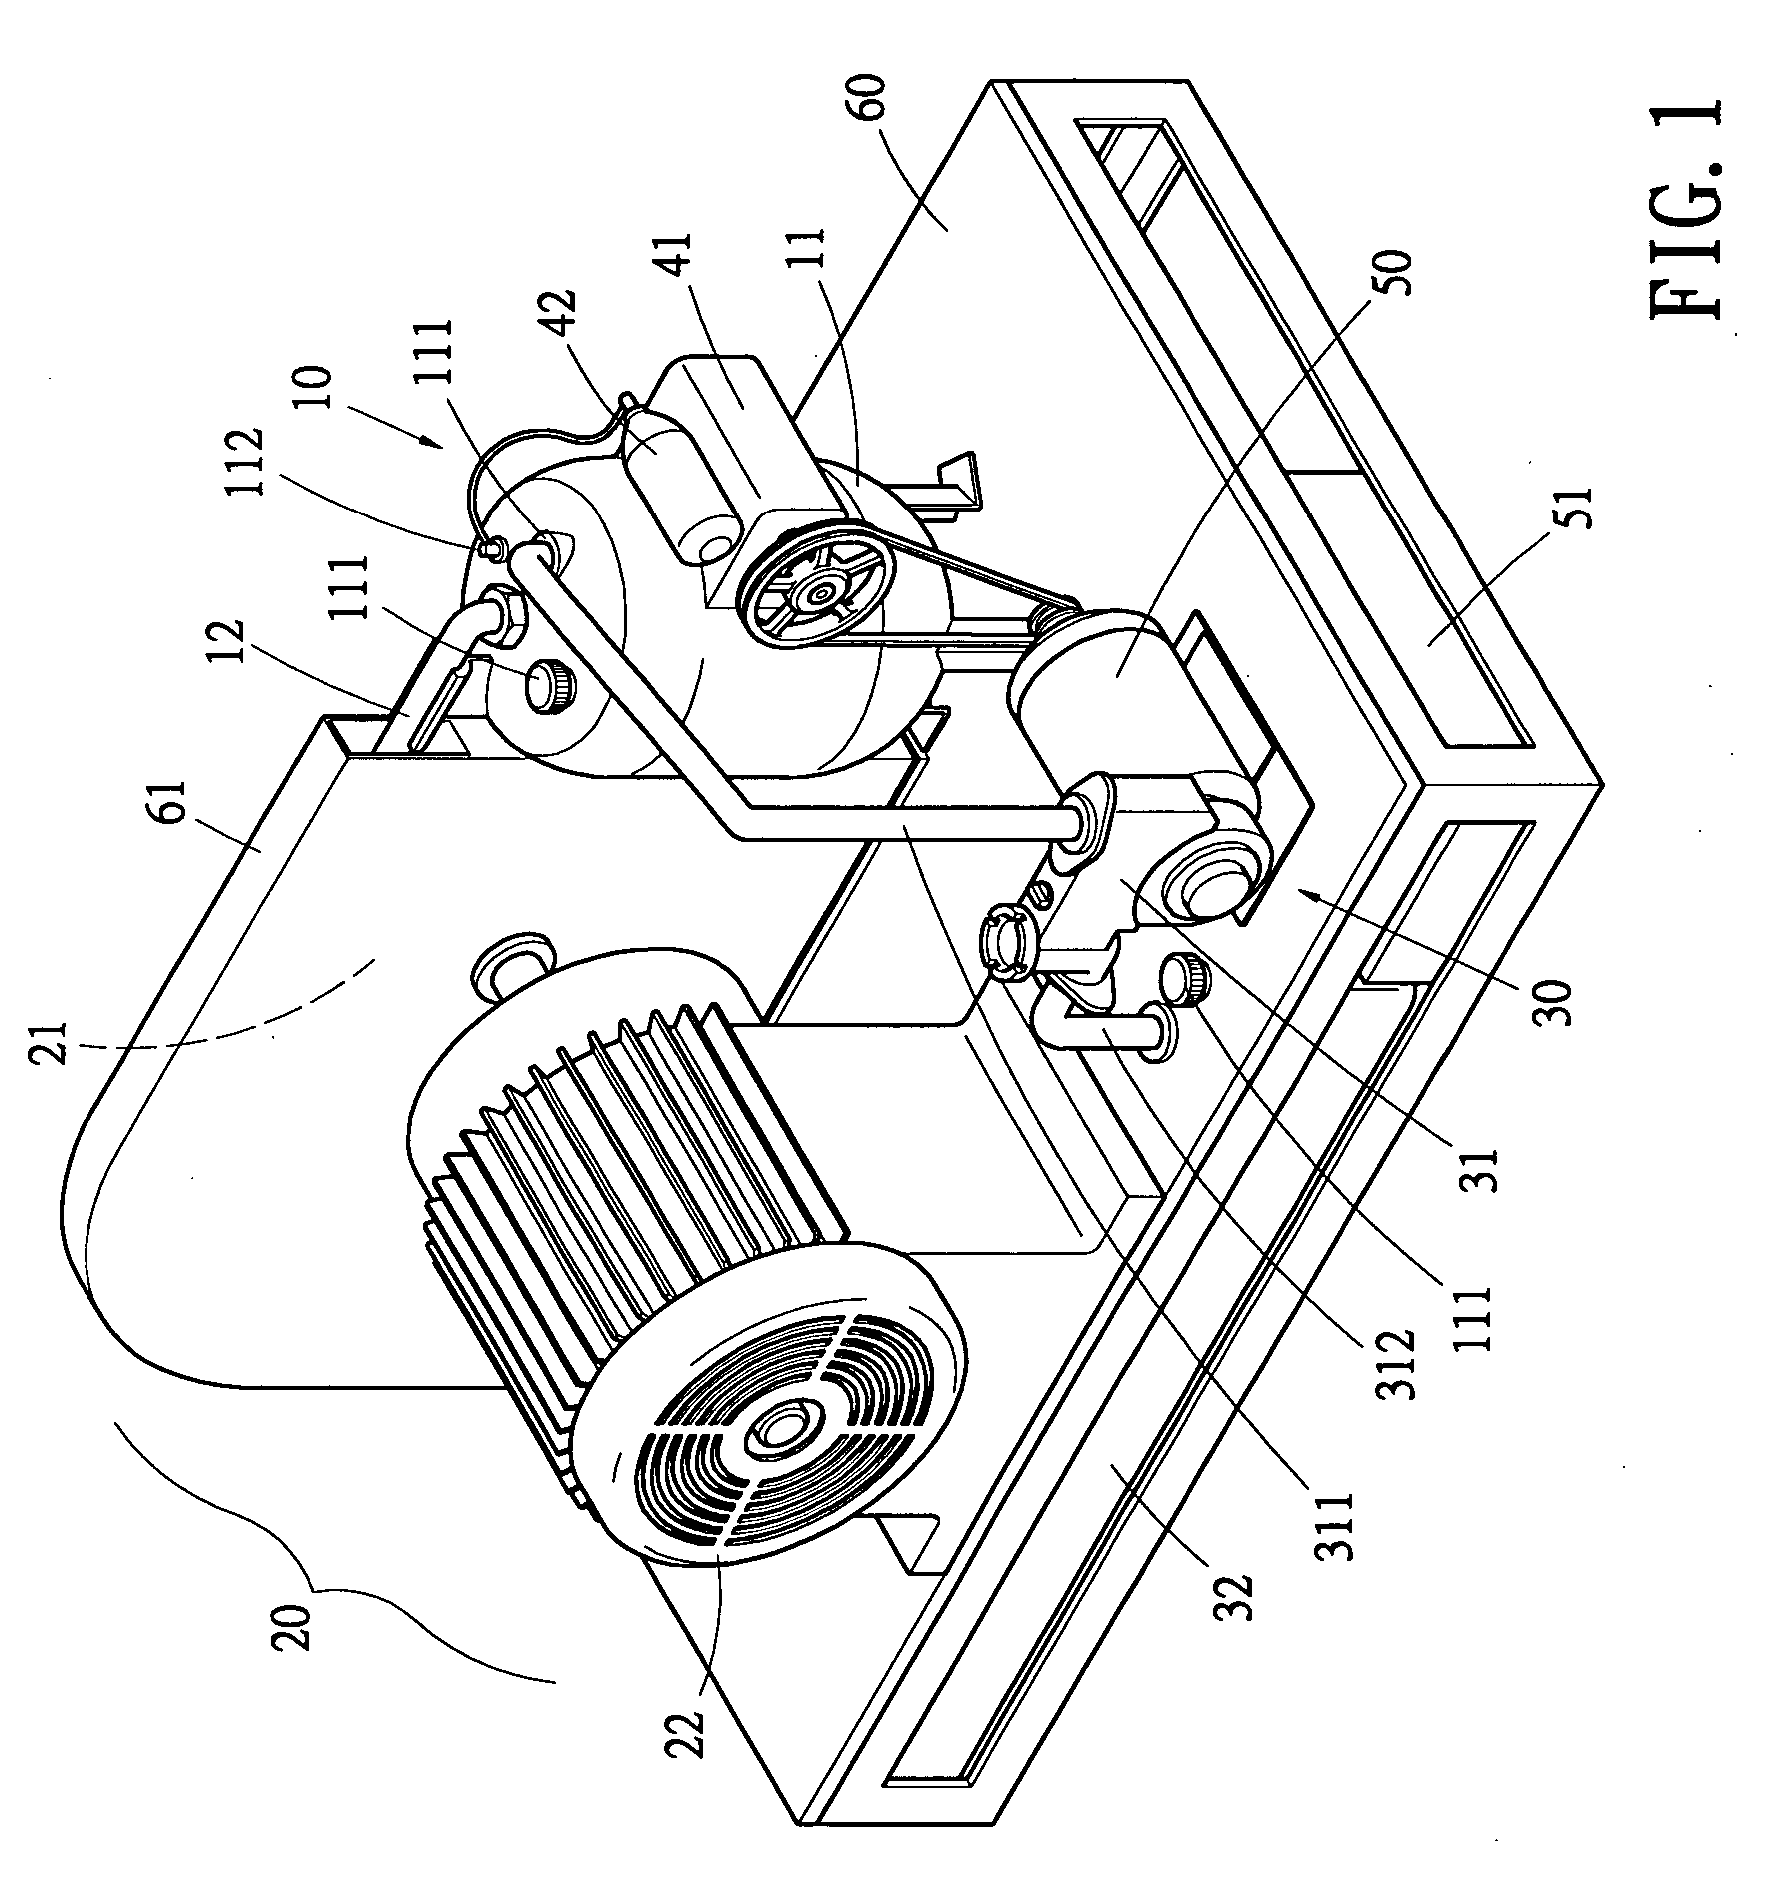 System for electric generating using accumulation pressure